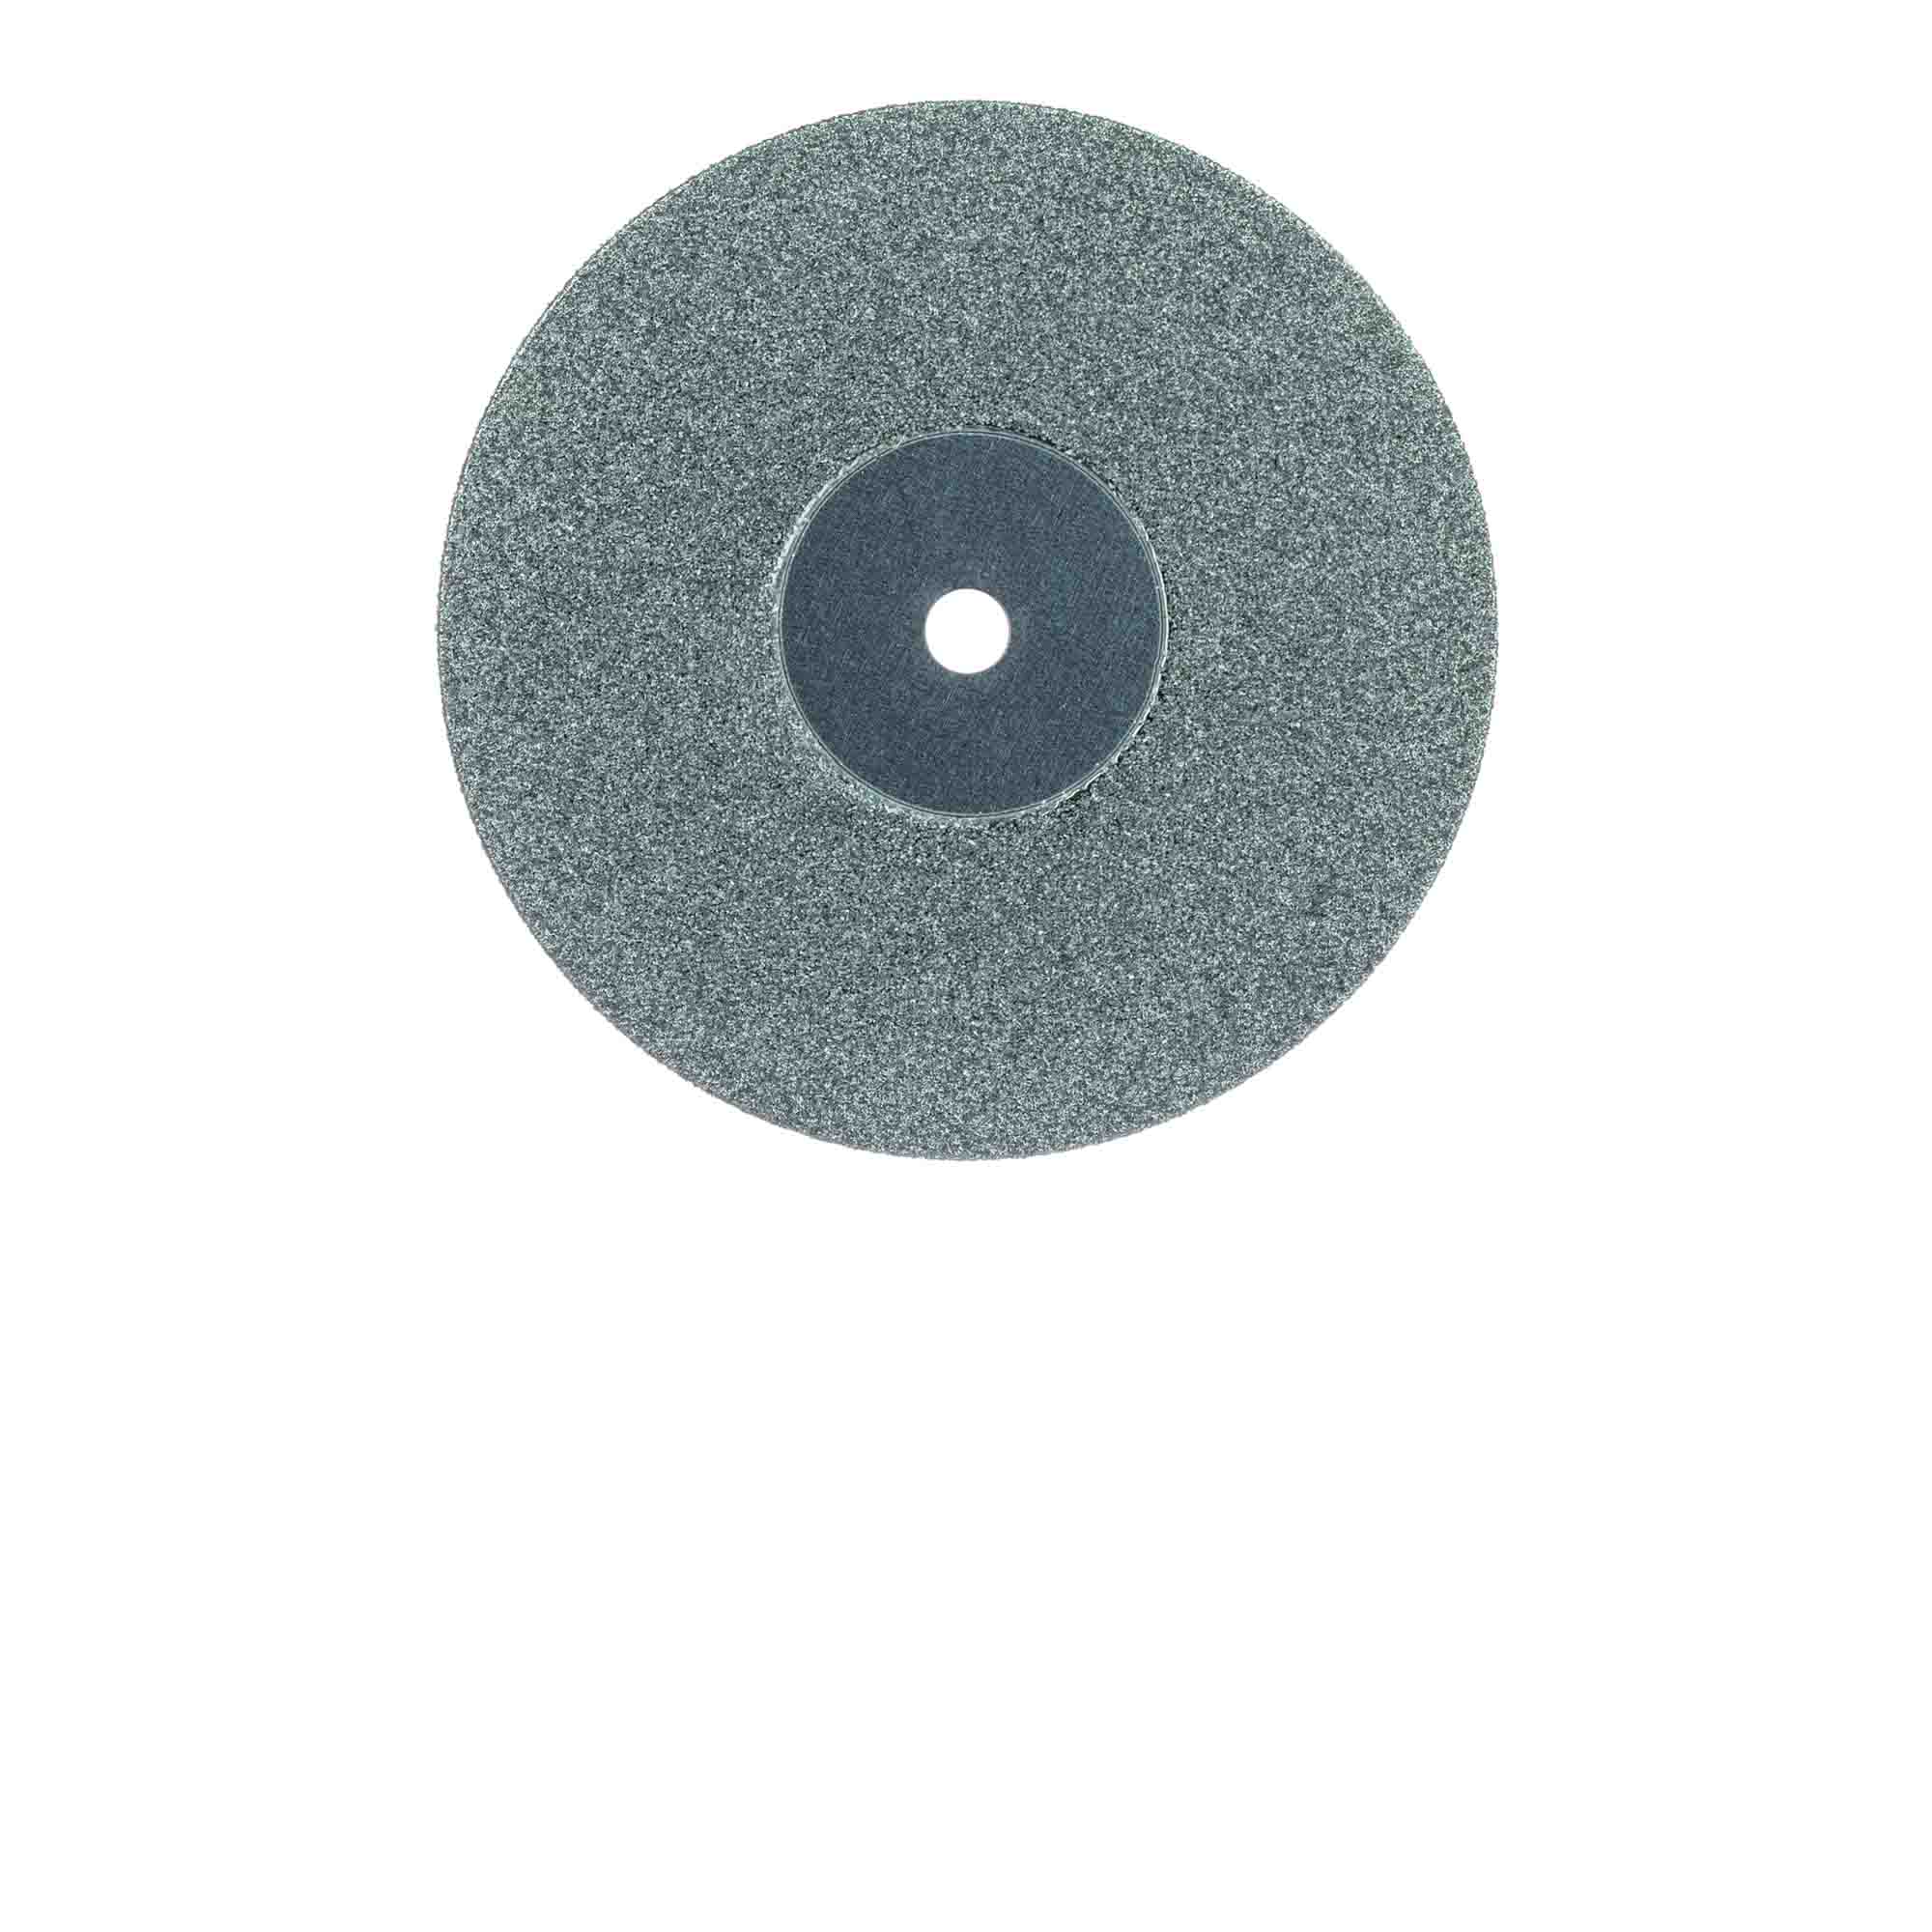 916D-190-UNM Diamond Disc, Double Sided, 0.5mm Thick, 19mm Ø, UNM